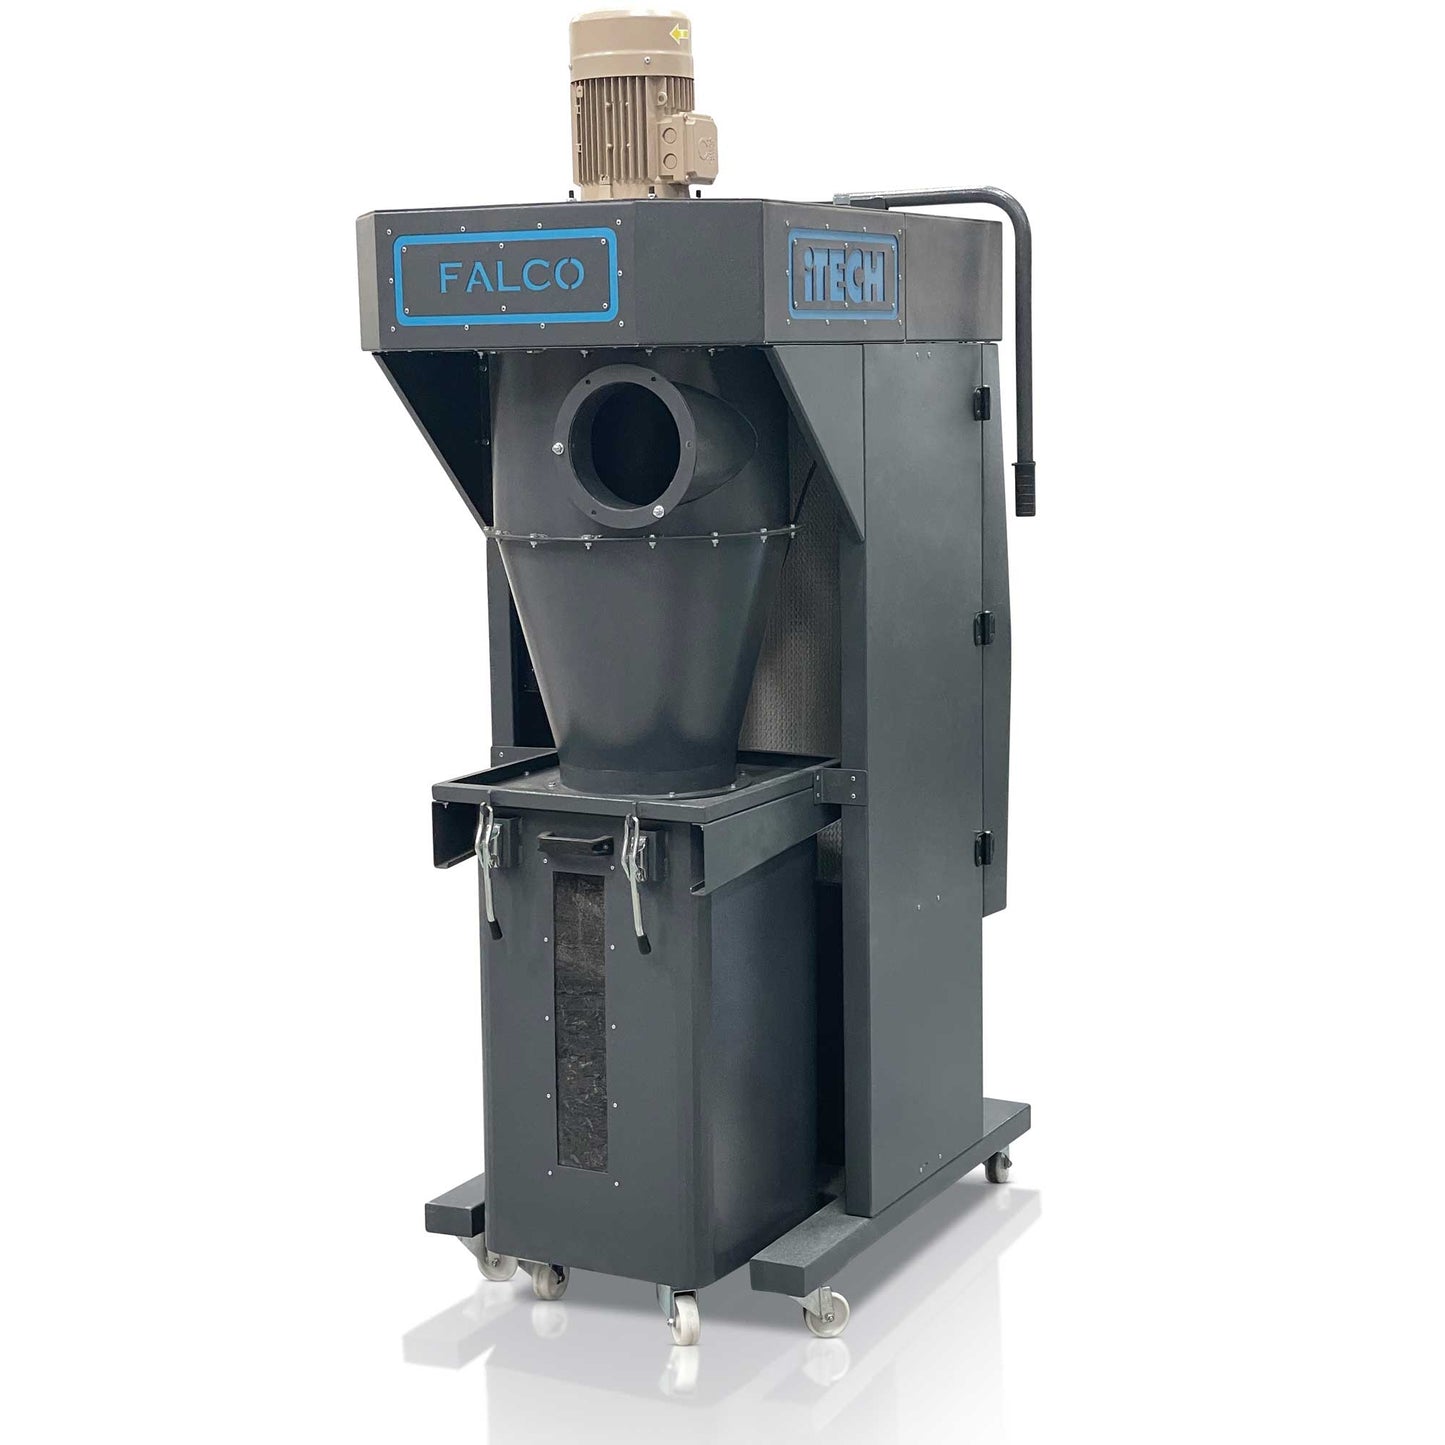 FALCO 2 CYCLONE DUST EXTRACTOR 230v 1 ph